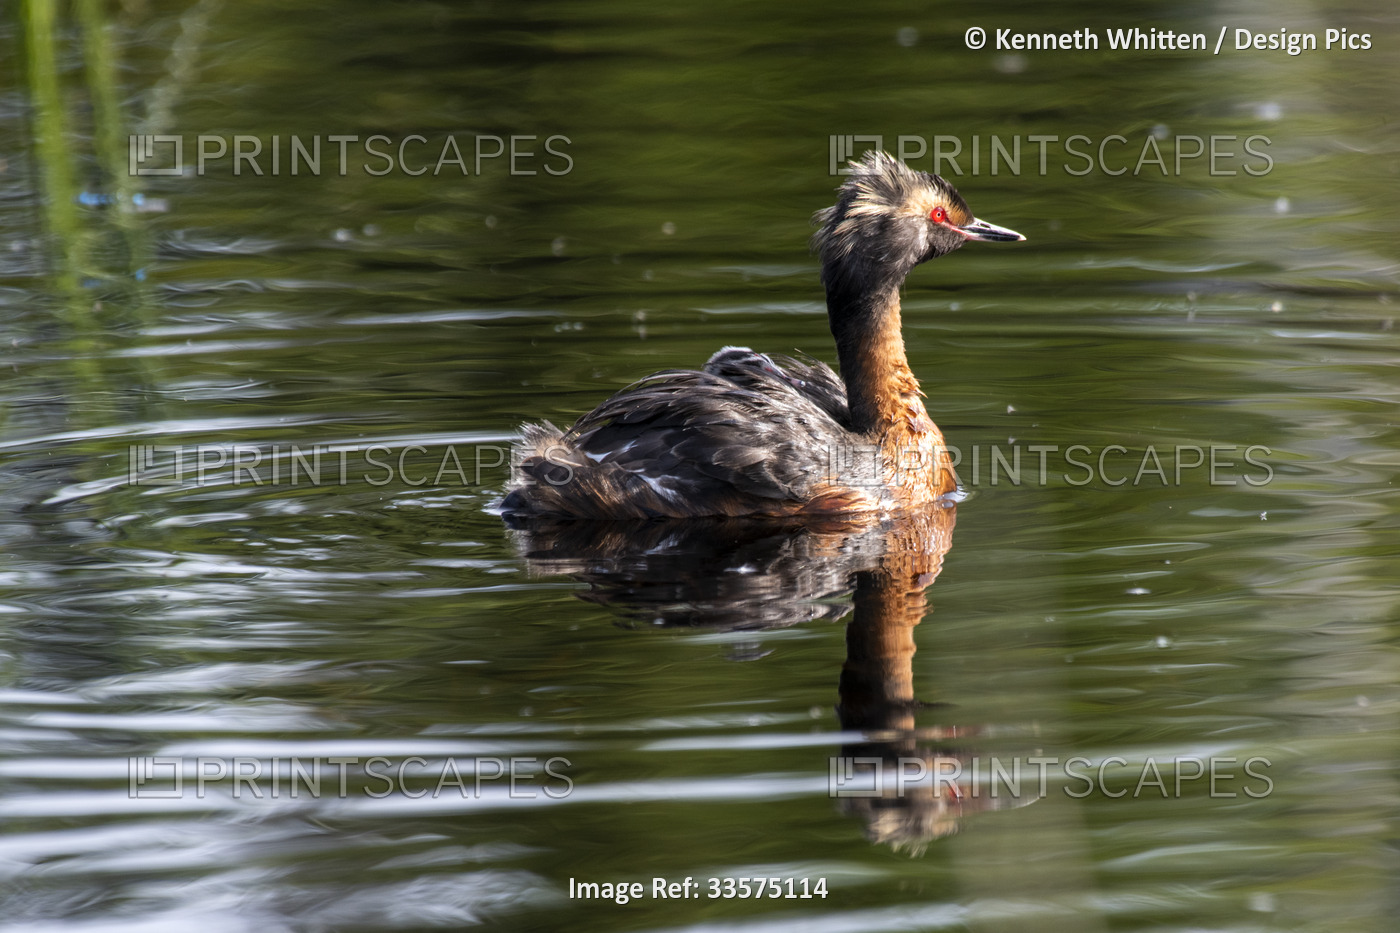 Horned Grebe (Podiceps auritus) with a chick riding on its back swimming in a ...